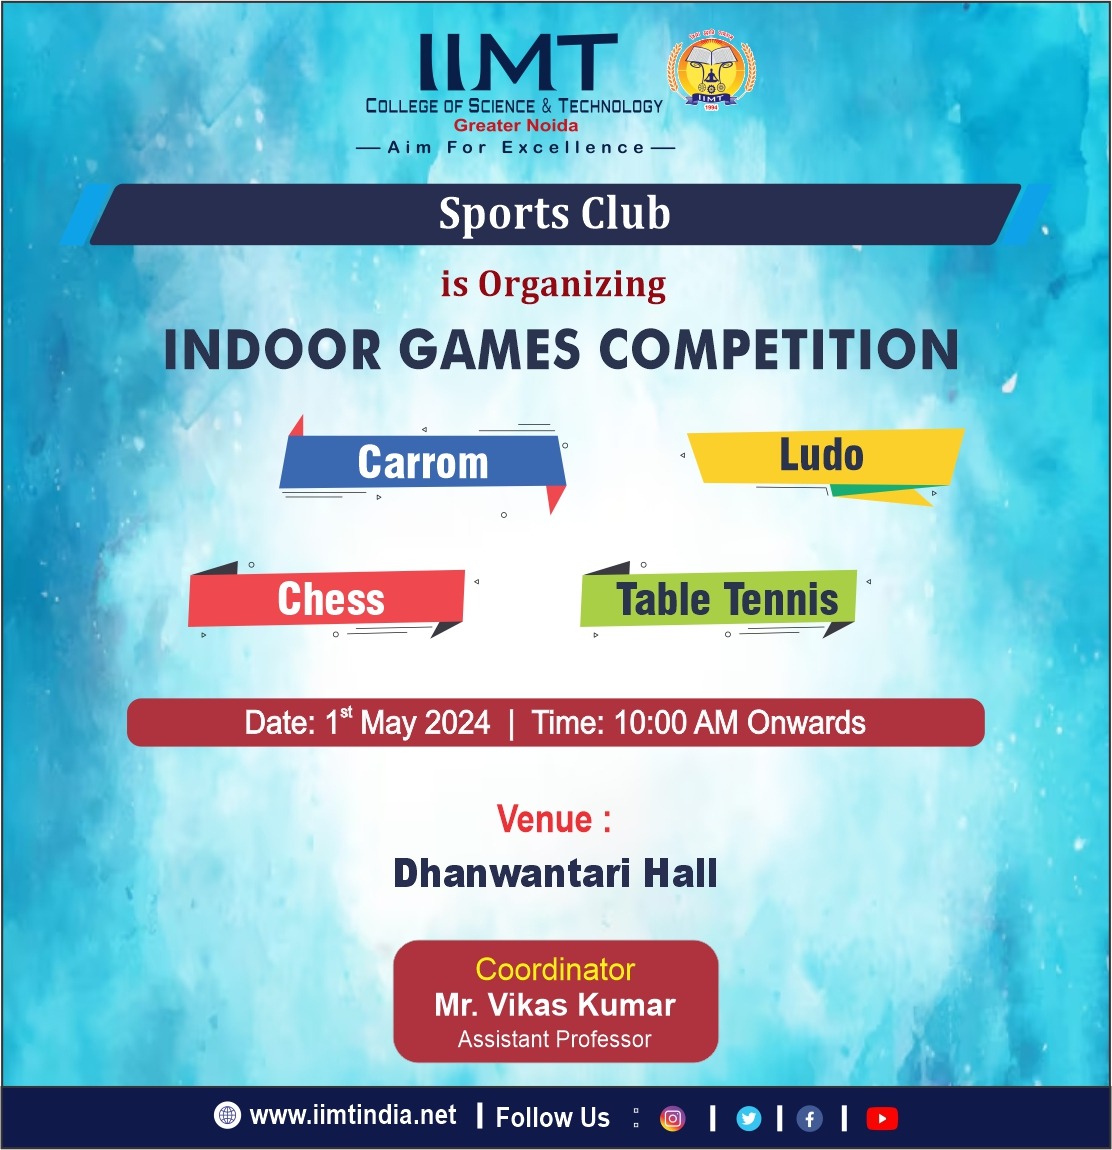 1st May 2024
Get ready to bring your A-game indoors! 🎲🏓 Join us on May 1st, 2024, for an exciting Indoor Games Competition featuring carrom, ludo, chess, and table tennis. #IndoorGames #CompetitionTime #GameOn #friendlycompétition